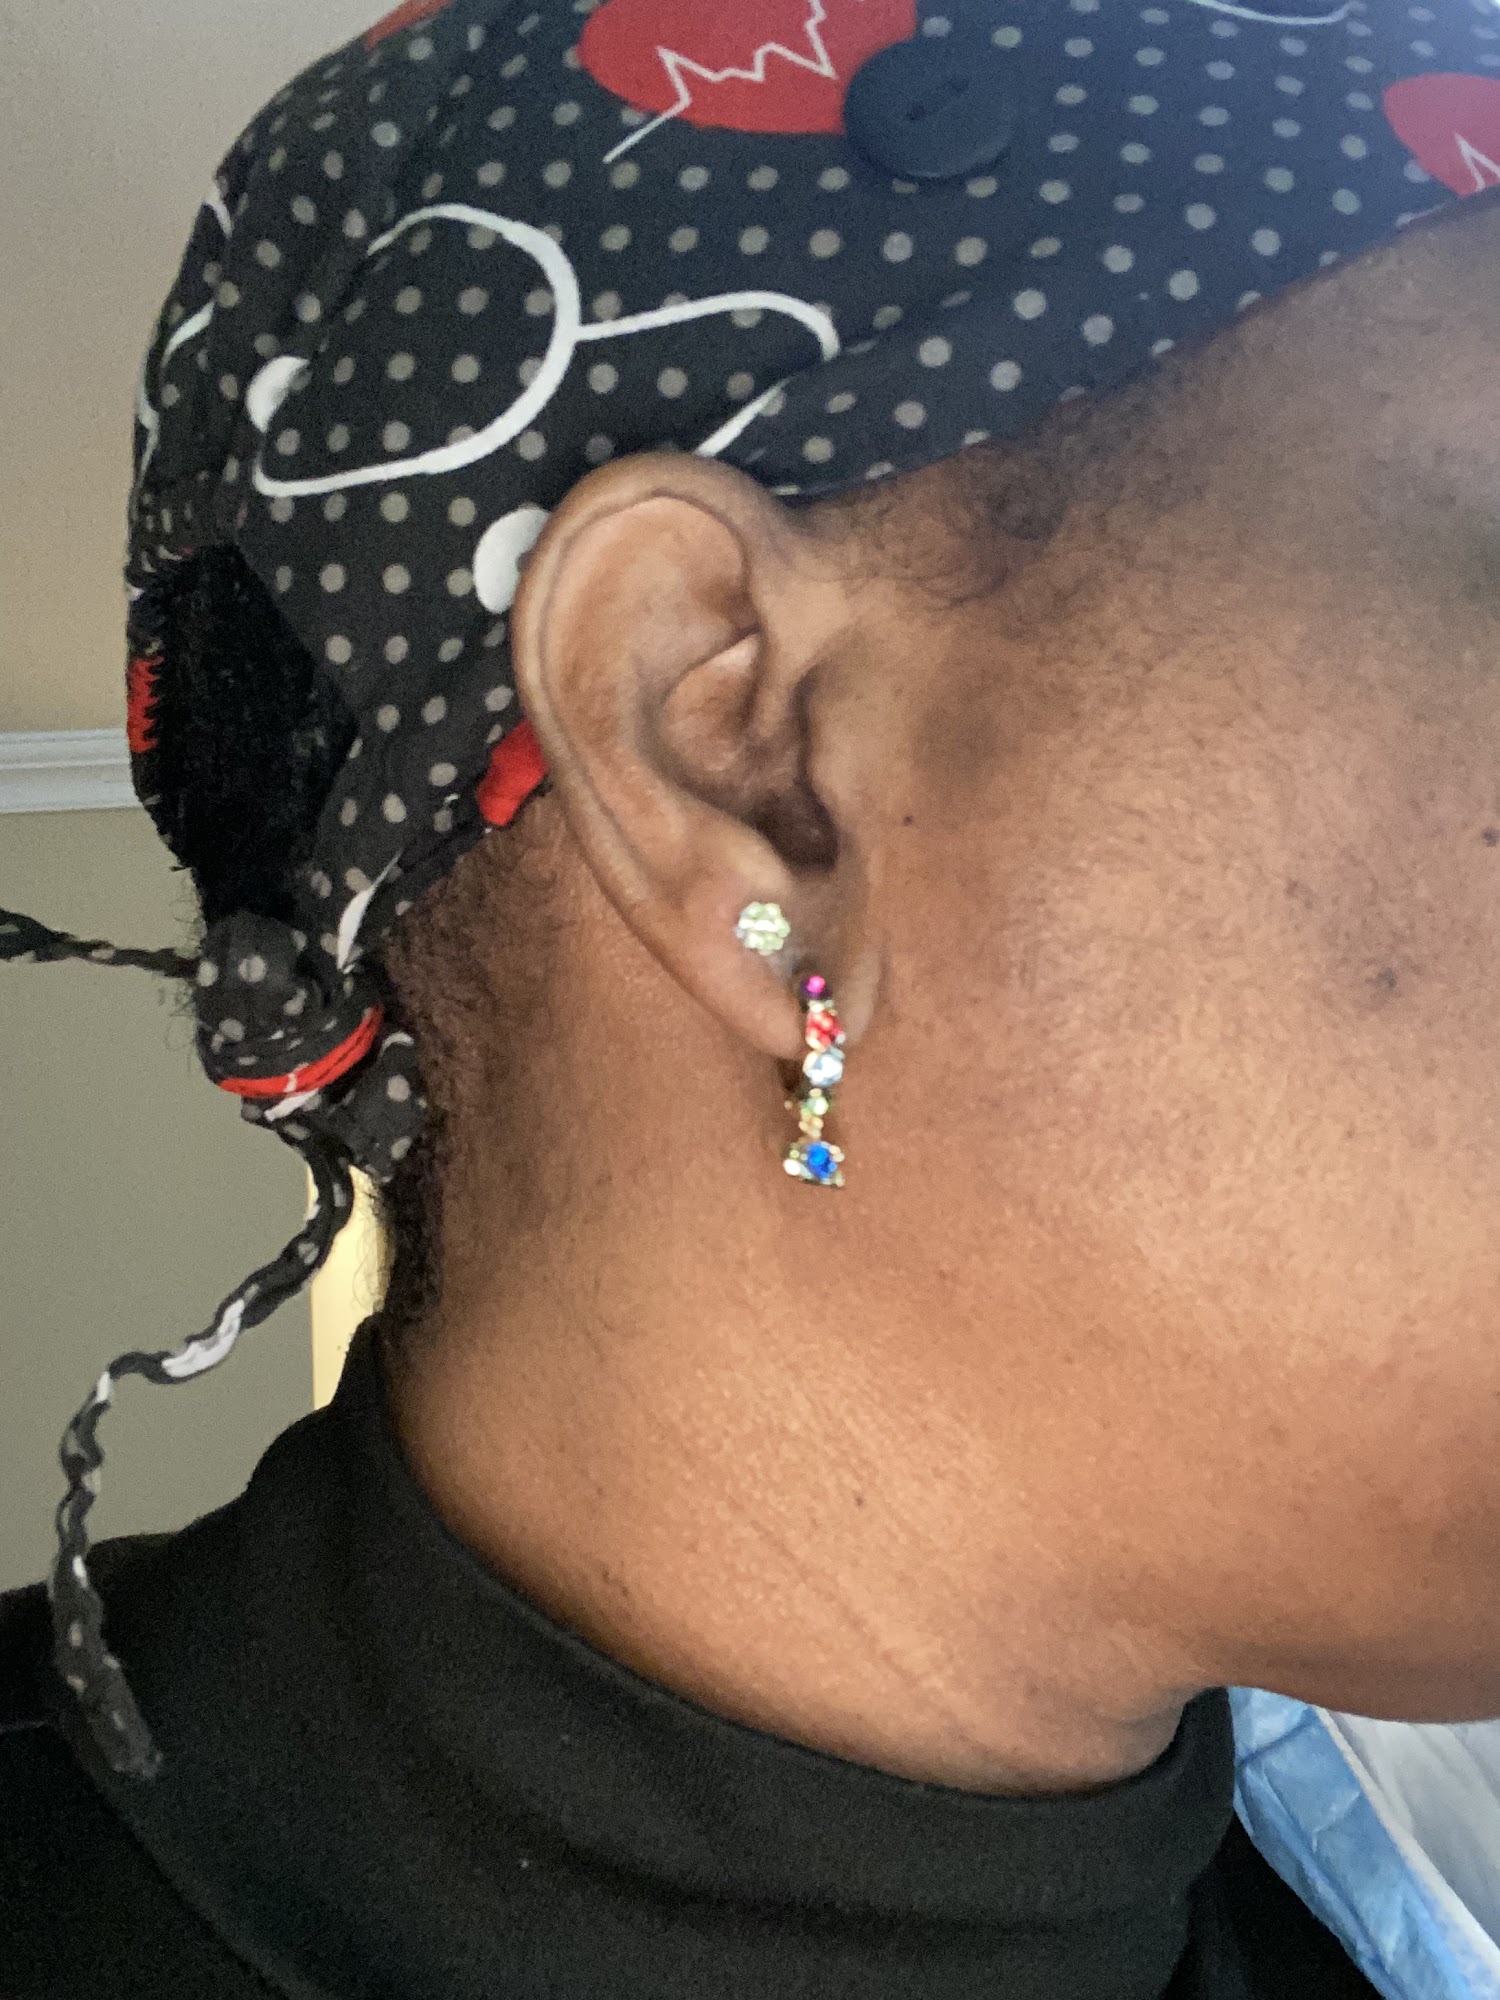 Clinical Piercing by PA ProMedical Lower Level, 228 S Orange Ave, South Orange New Jersey 07079